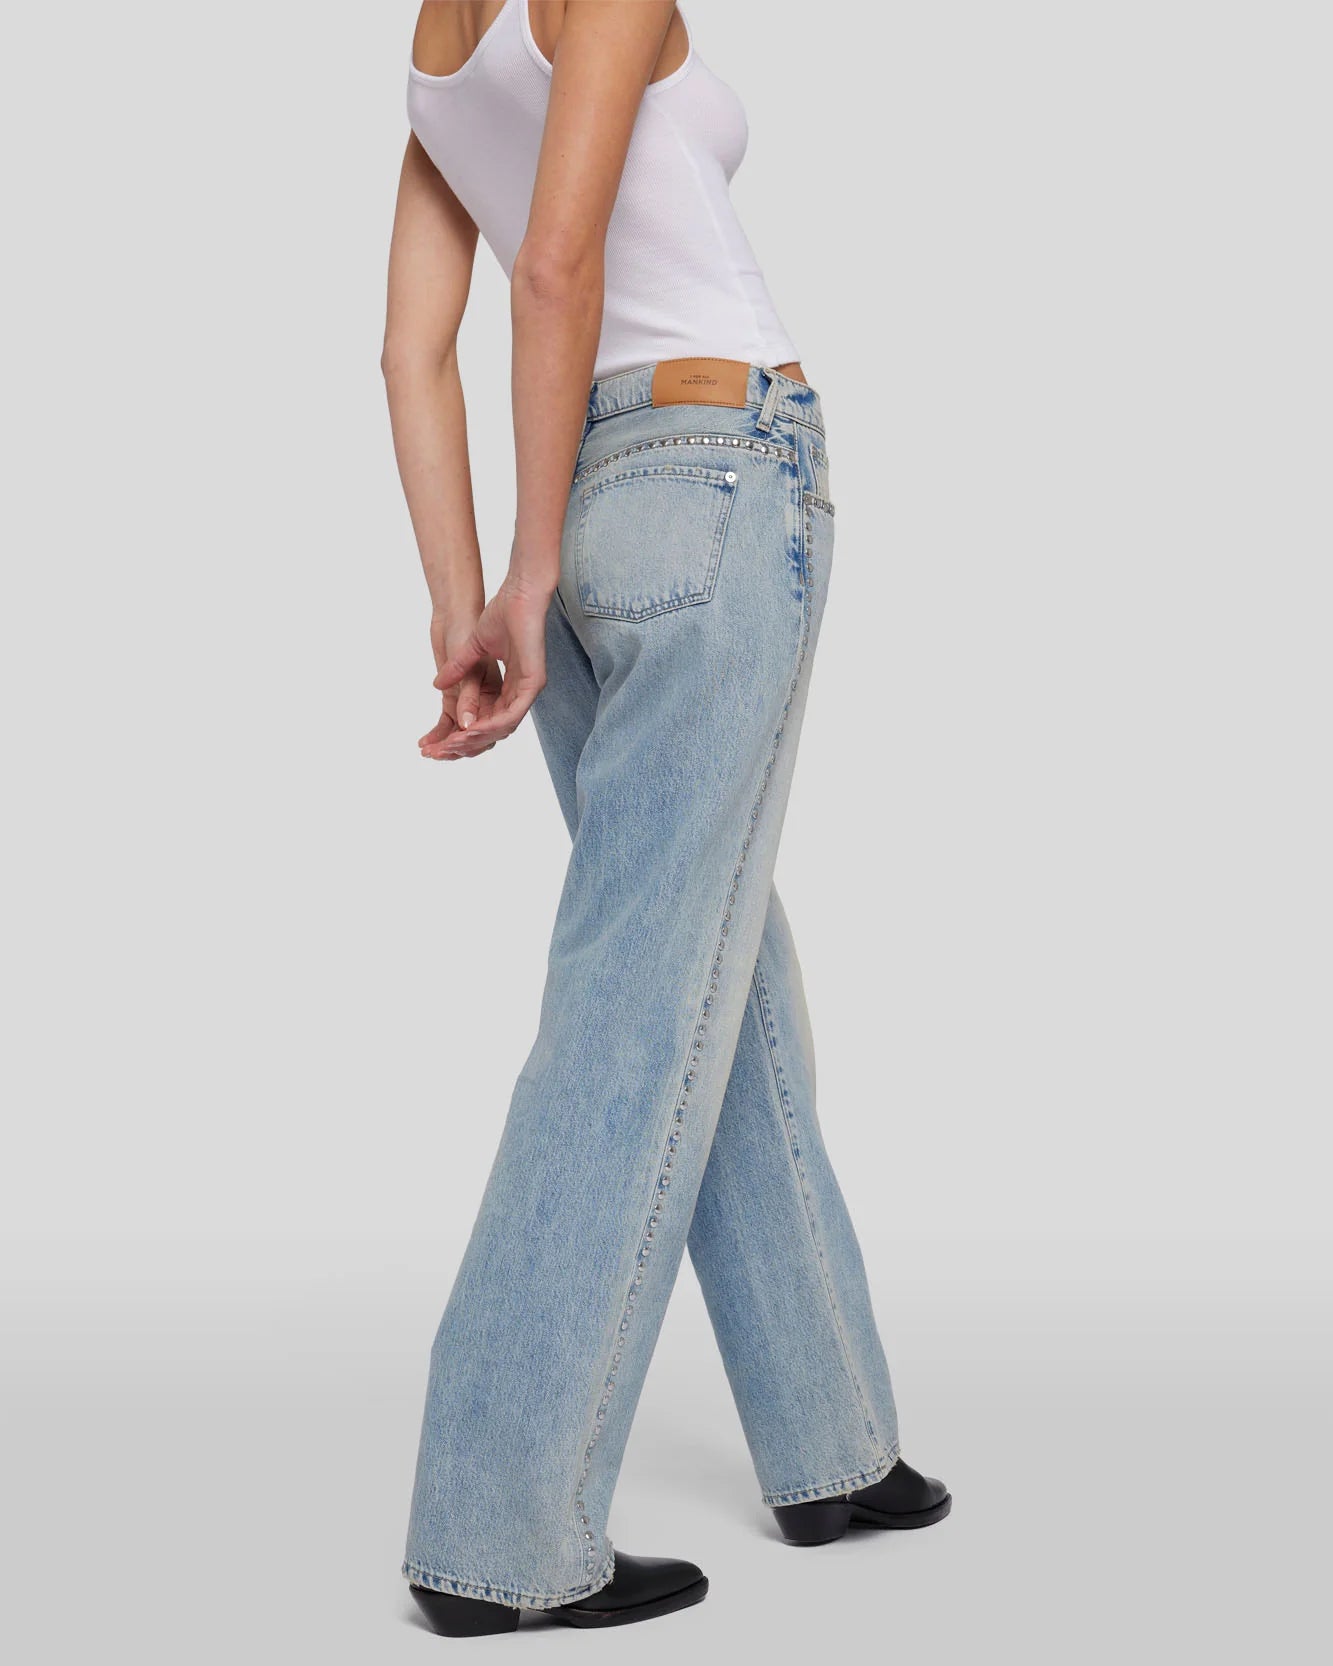 7 For All Mankind ‘Tess Trouser’